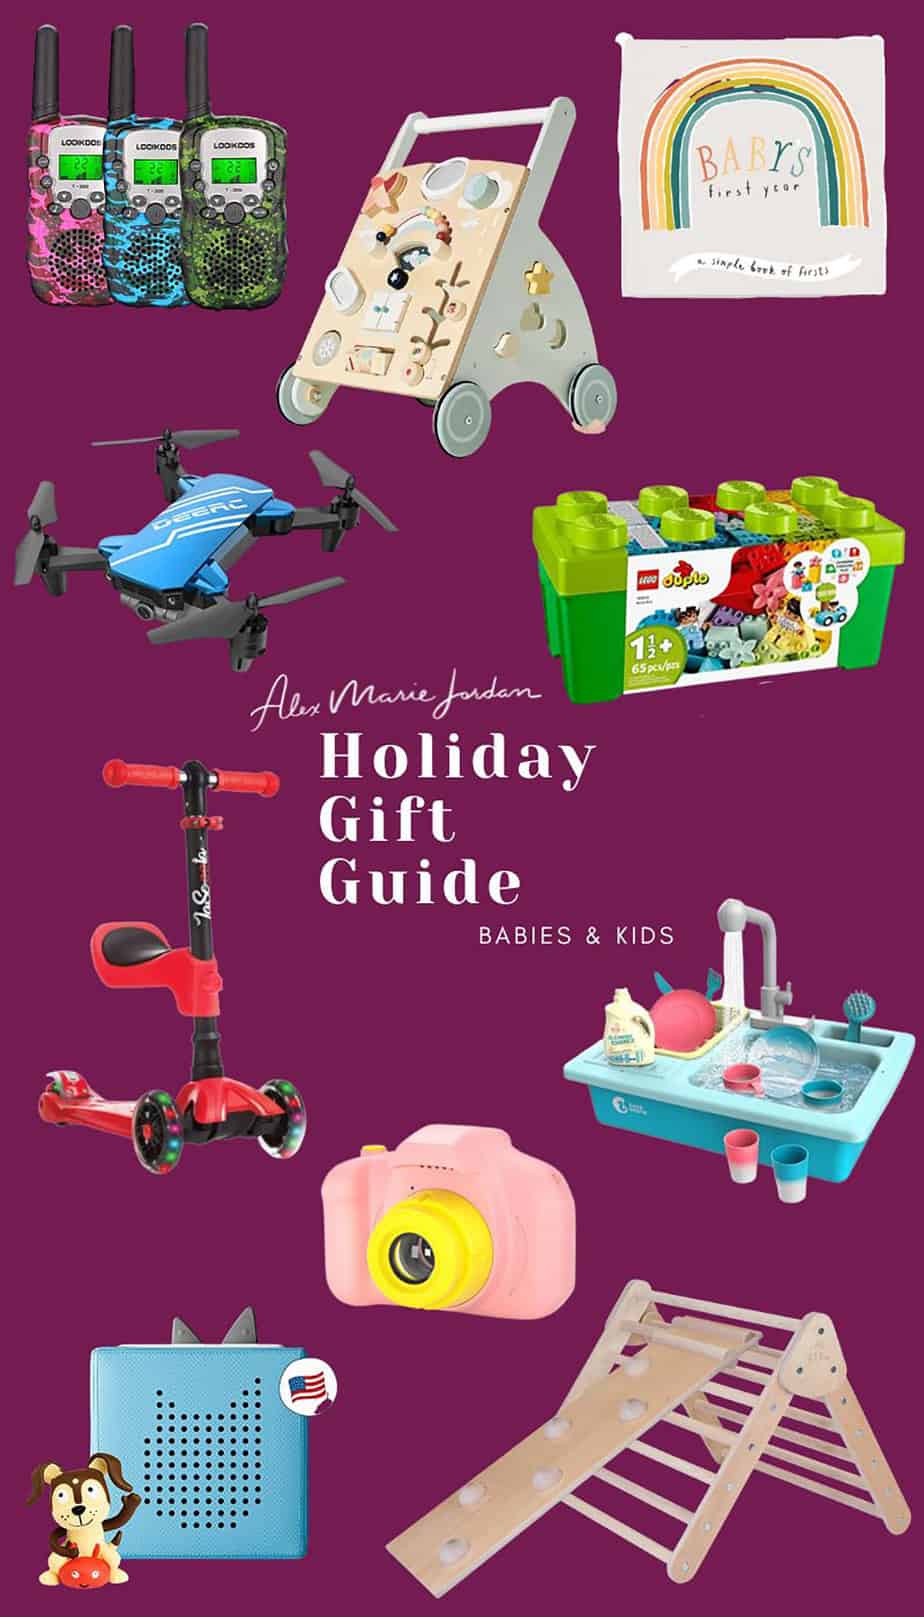 Gift guide for babies and kids featuring walkie talkies, building blocks, scooter, toddler camera, mini drone, and montessori toys.